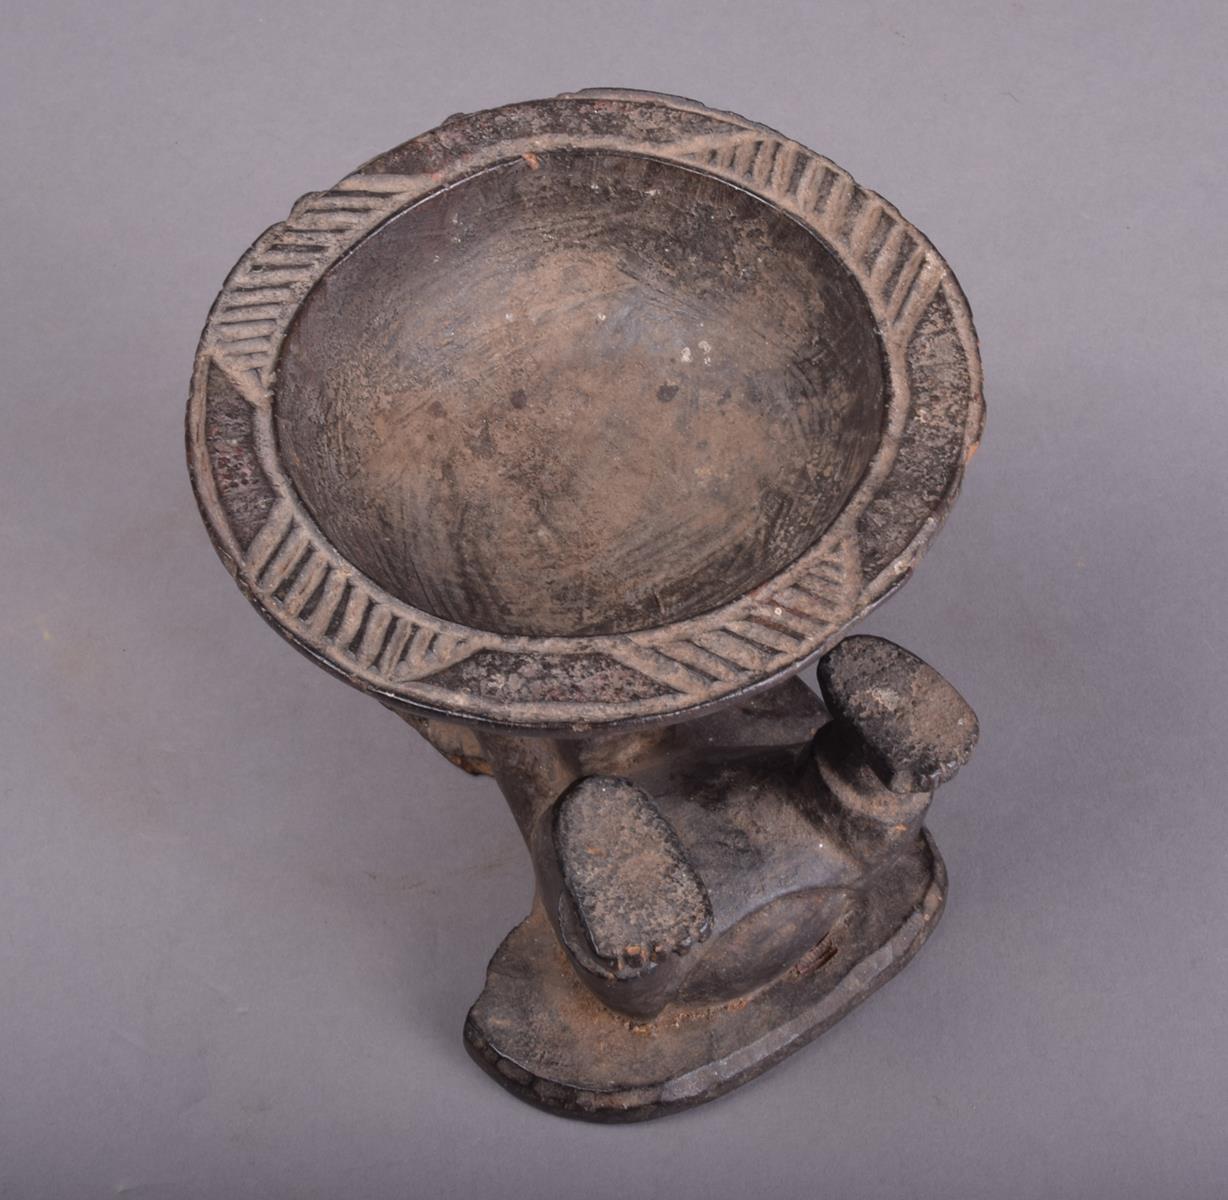 A Yoruba divination bowl Nigeria with an incised edge and supported by an acrobatic figure 14.5cm - Image 6 of 7